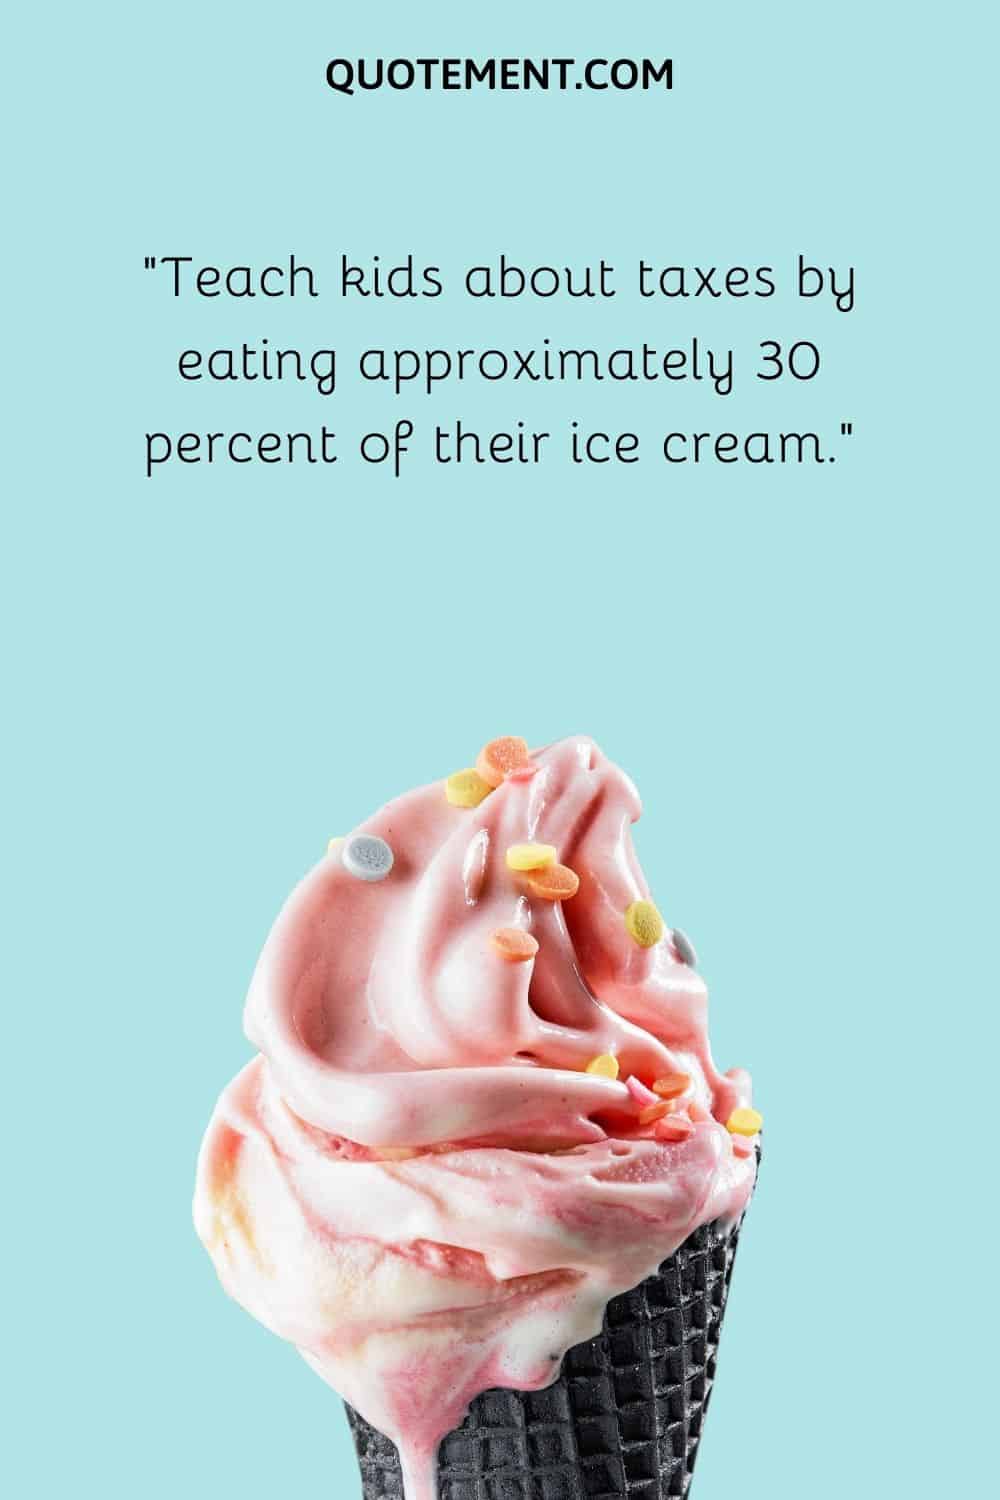 Teach kids about taxes by eating approximately 30 percent of their ice cream